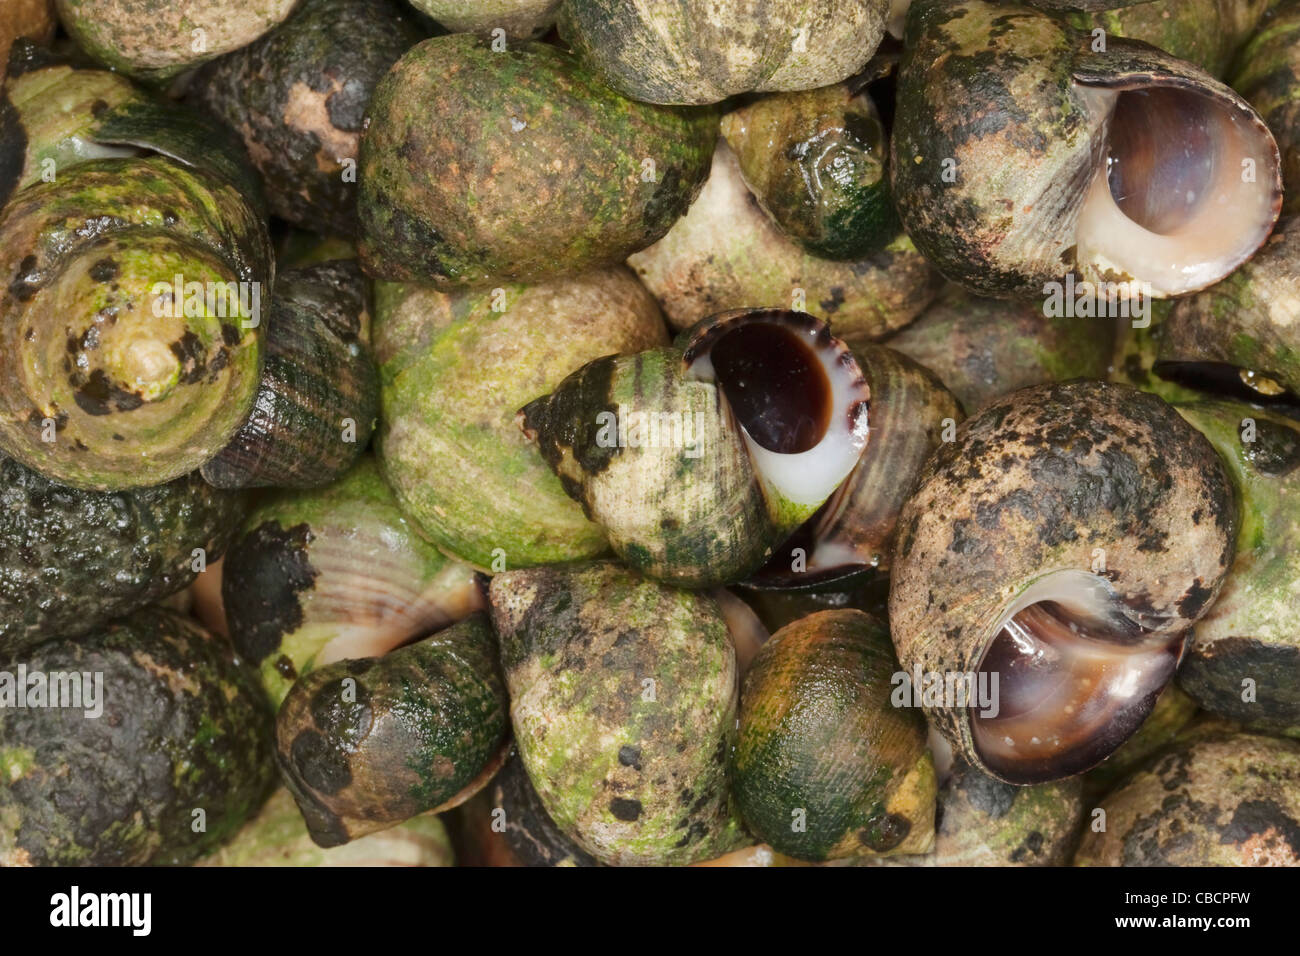 Empty shells from cooked common periwinkles or winkles, scientific name Littorina Littorea. Stock Photo